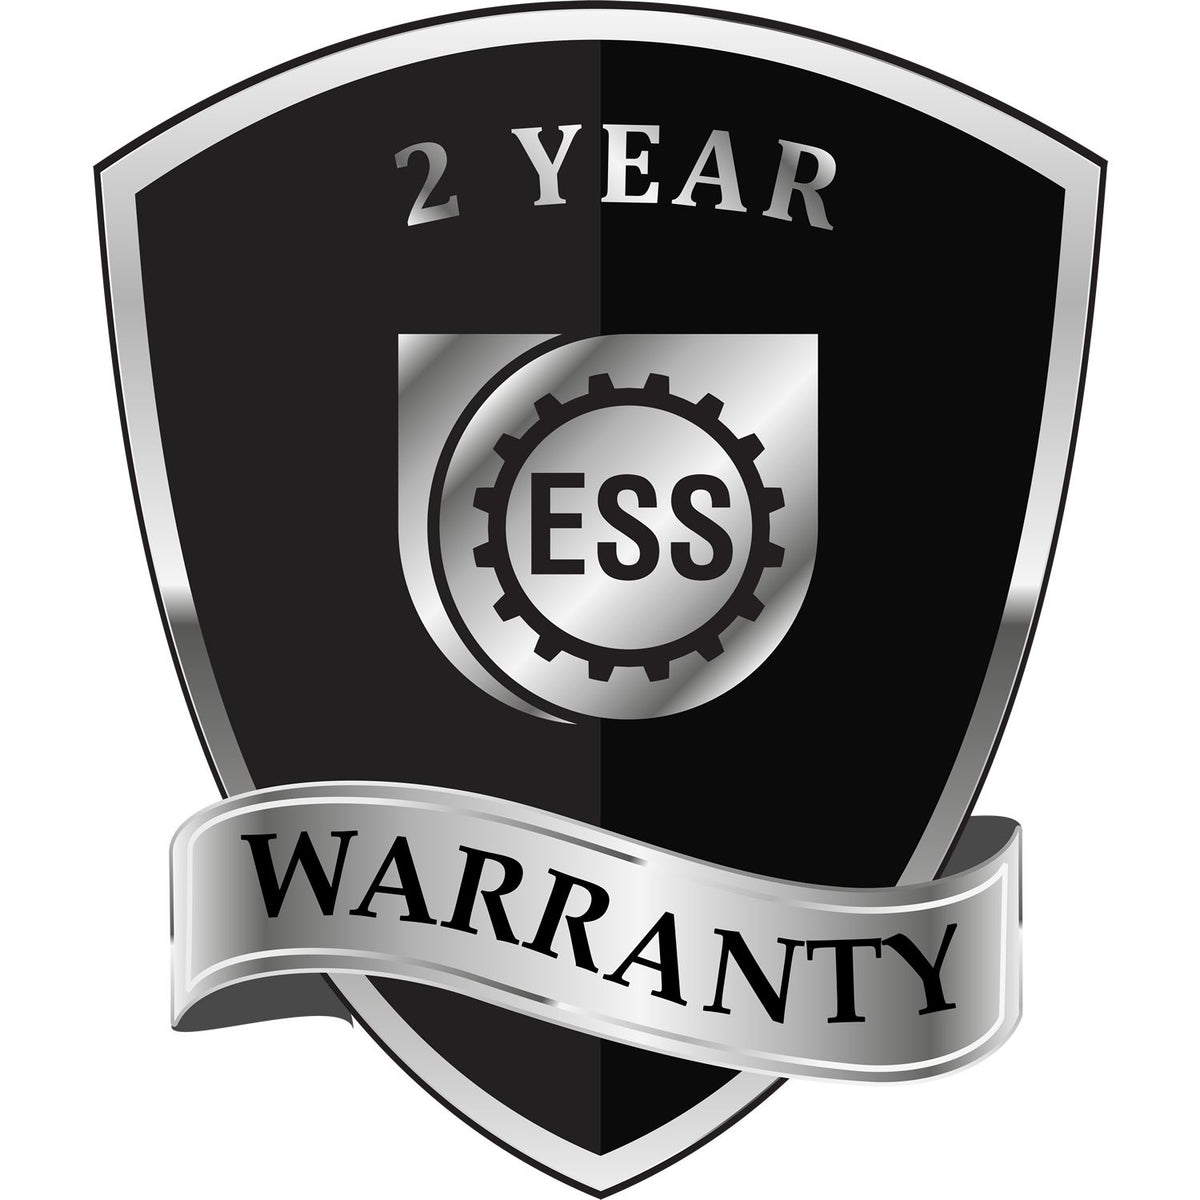 A black and silver badge or emblem showing warranty information for the Hybrid Missouri Architect Seal